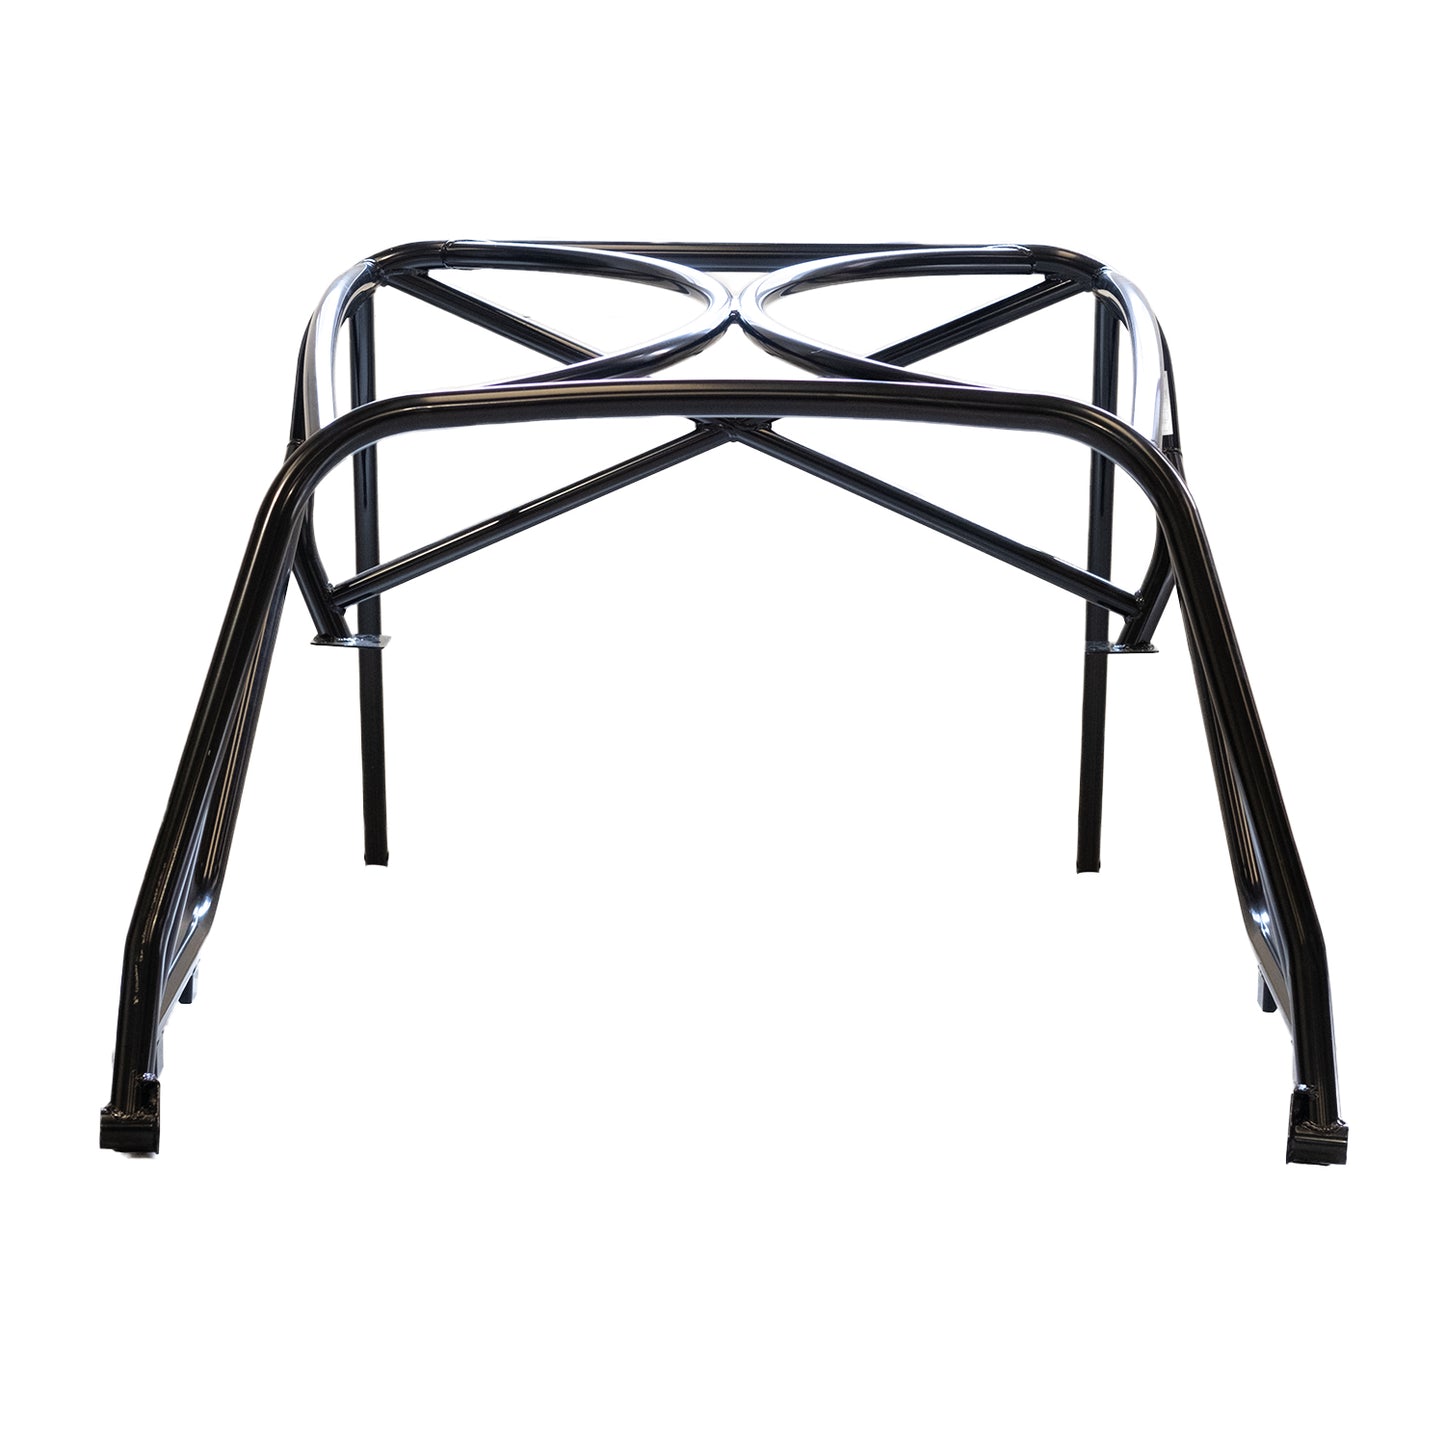 MK Indy FIA Approved Roll Cage Double D External